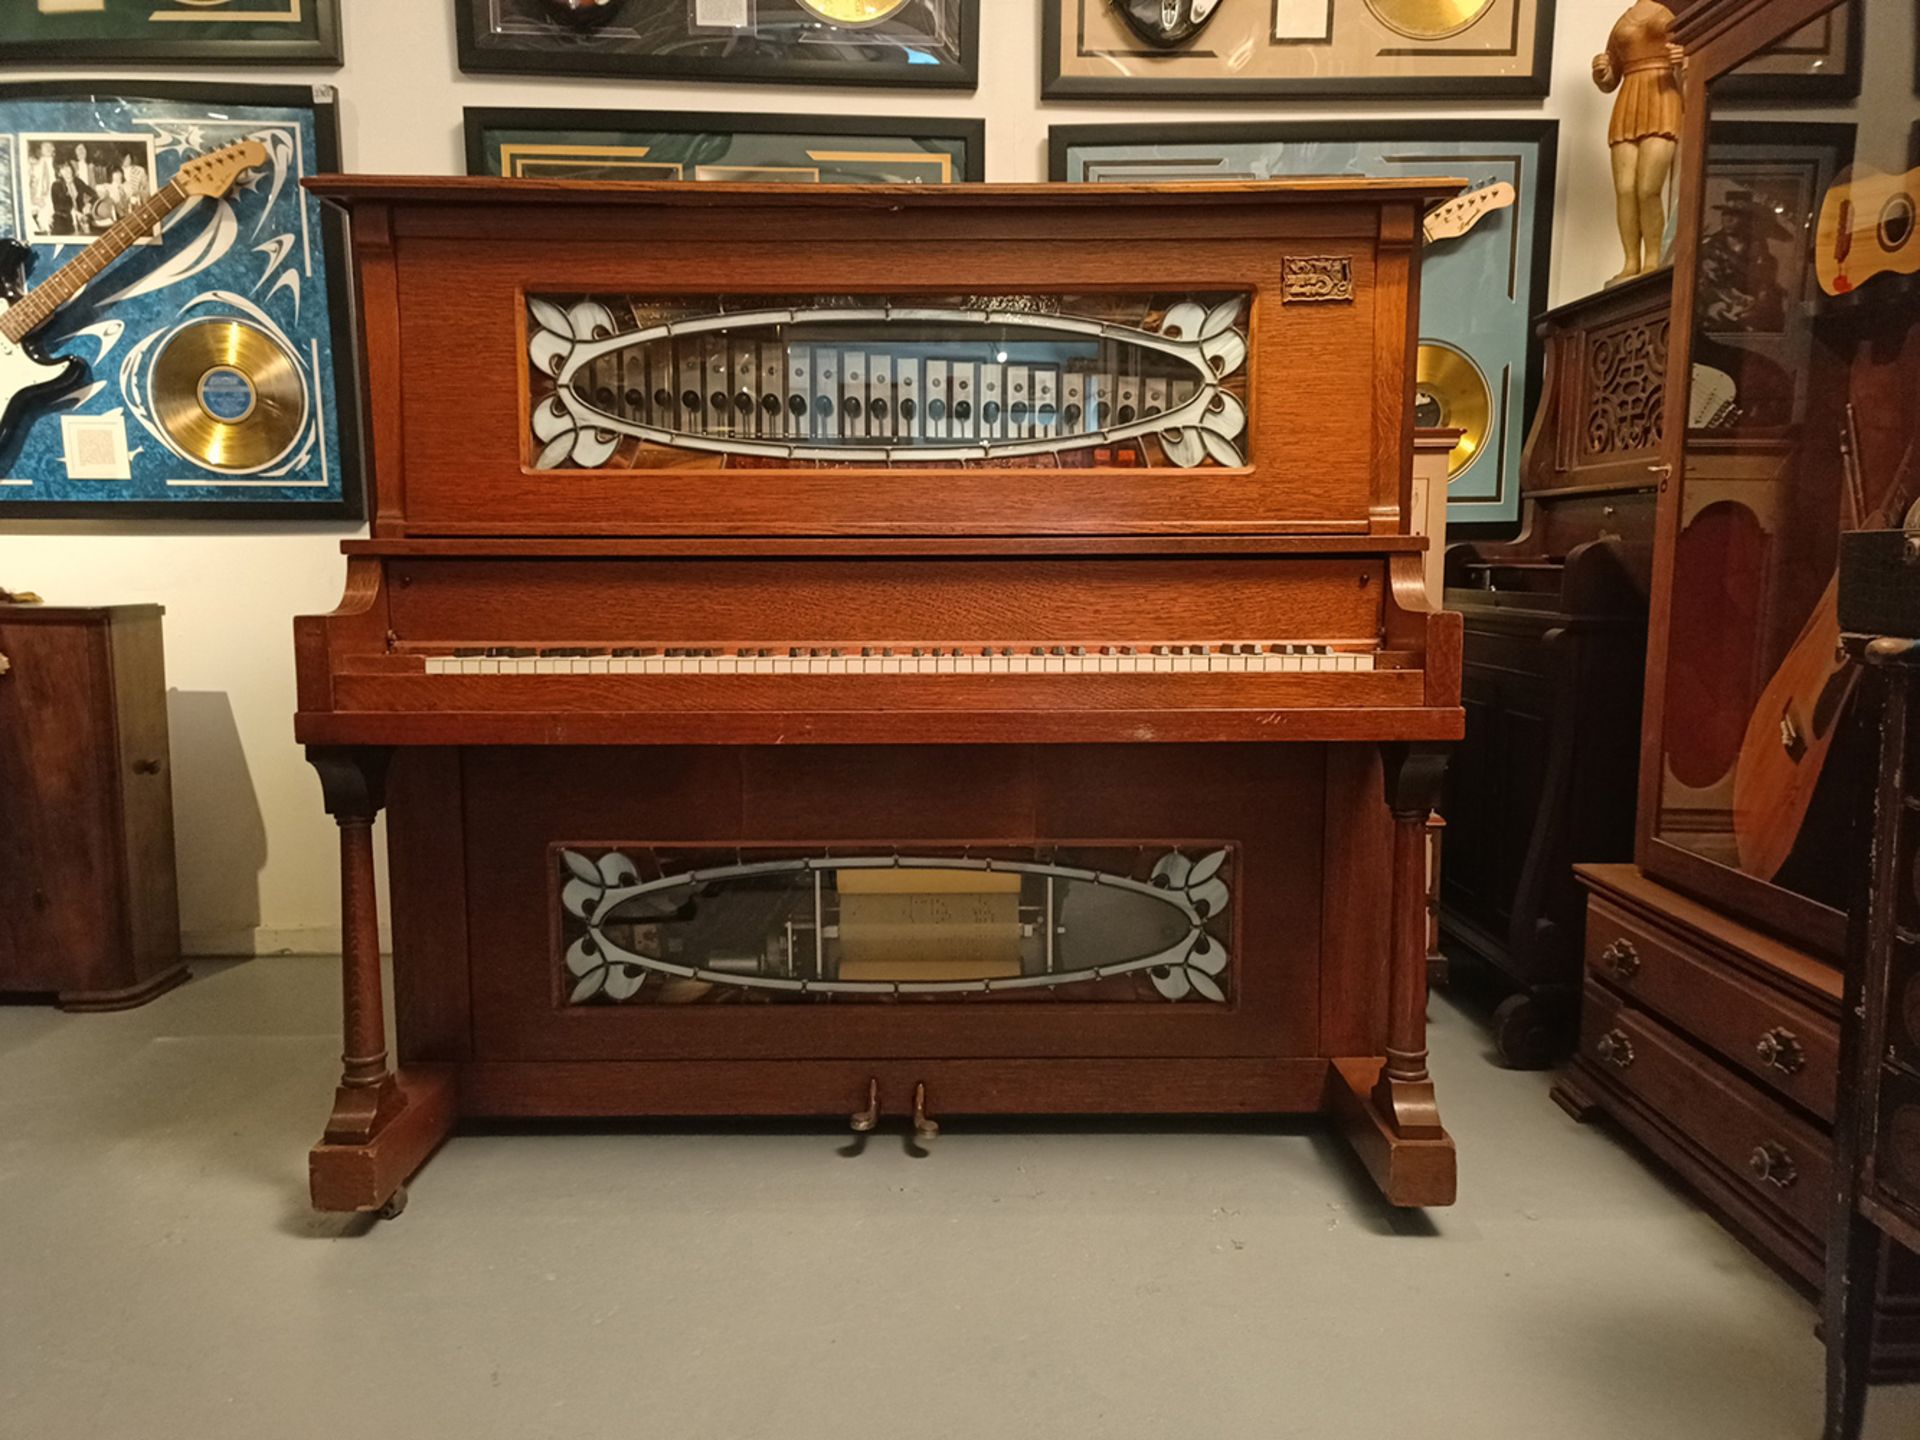 Orchestrion Manufactured by Artemis Chicago